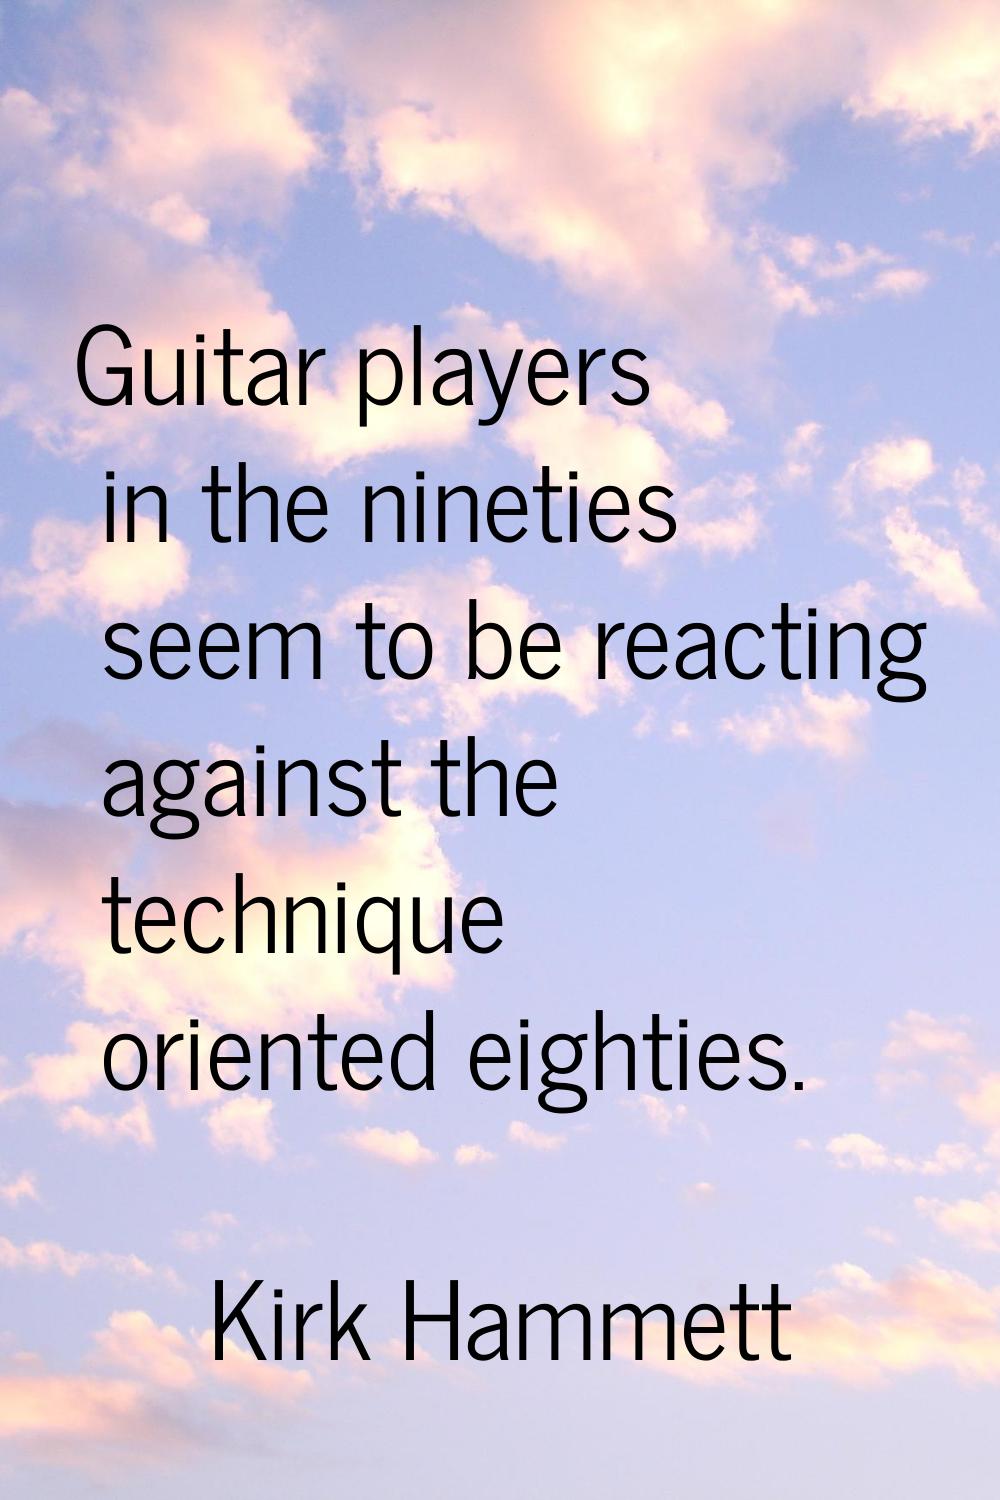 Guitar players in the nineties seem to be reacting against the technique oriented eighties.